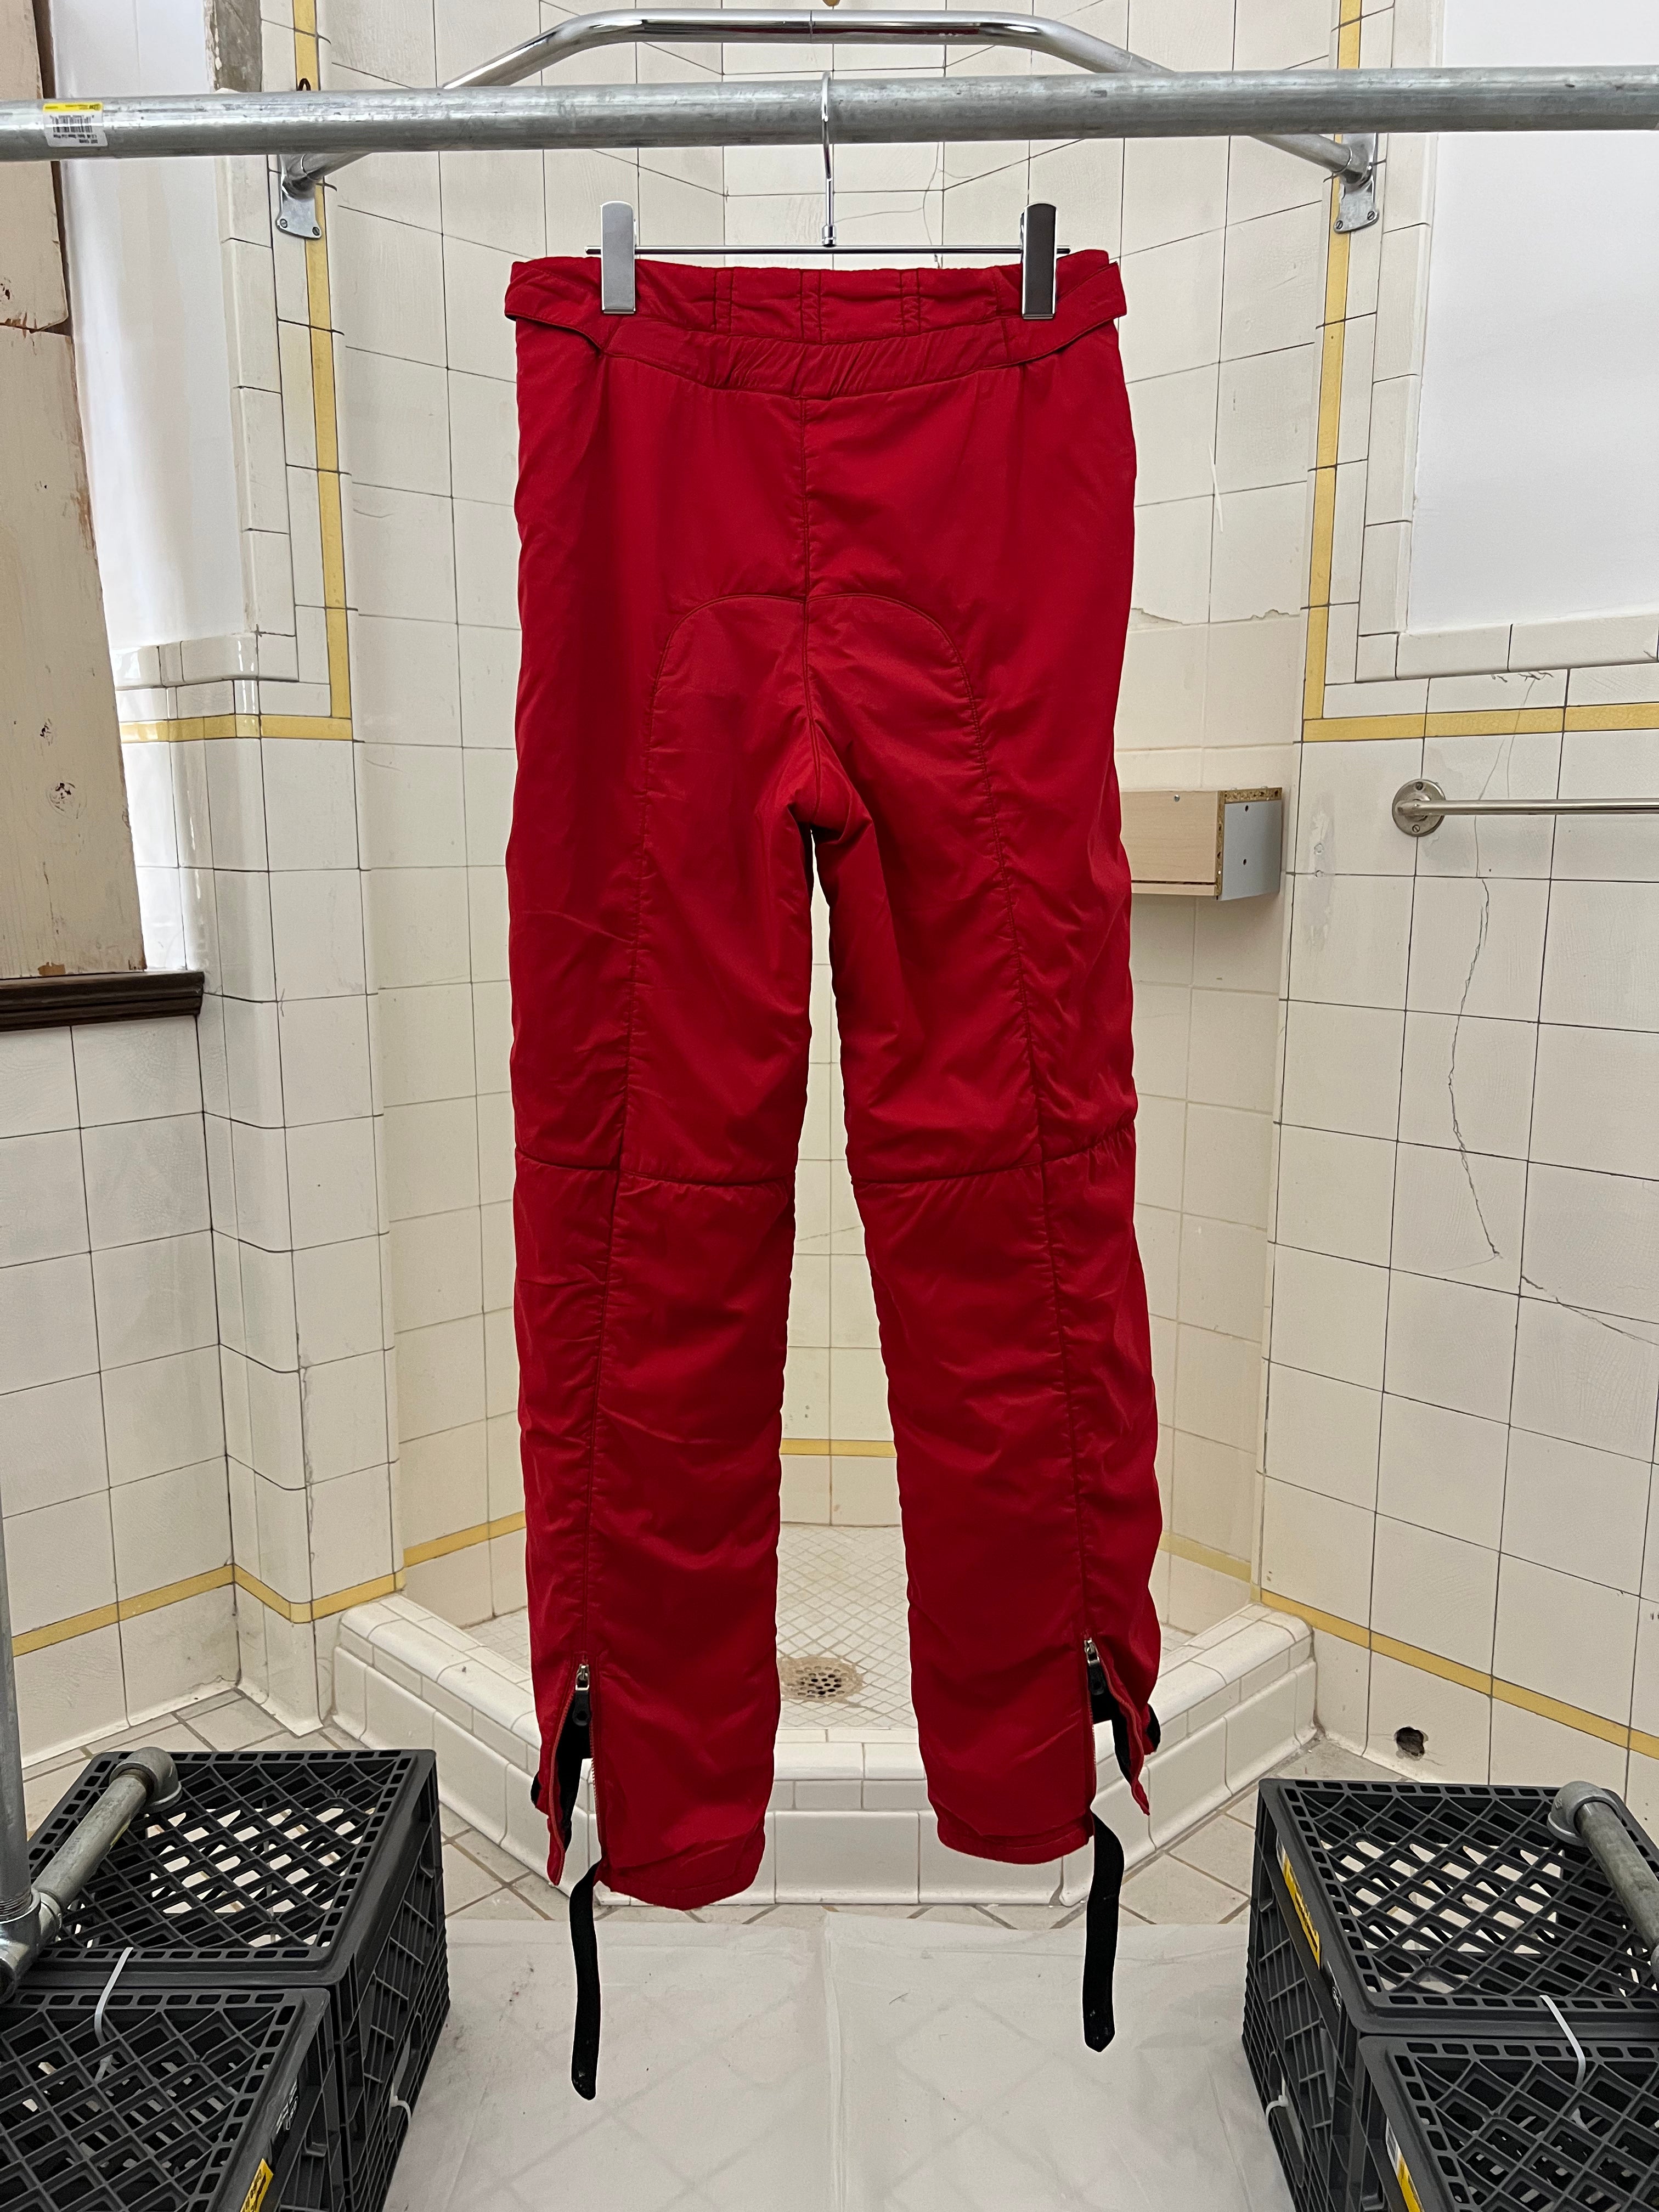 2000s Armani Red Futuristic Padded Nylon Pants - Size M – Constant Practice